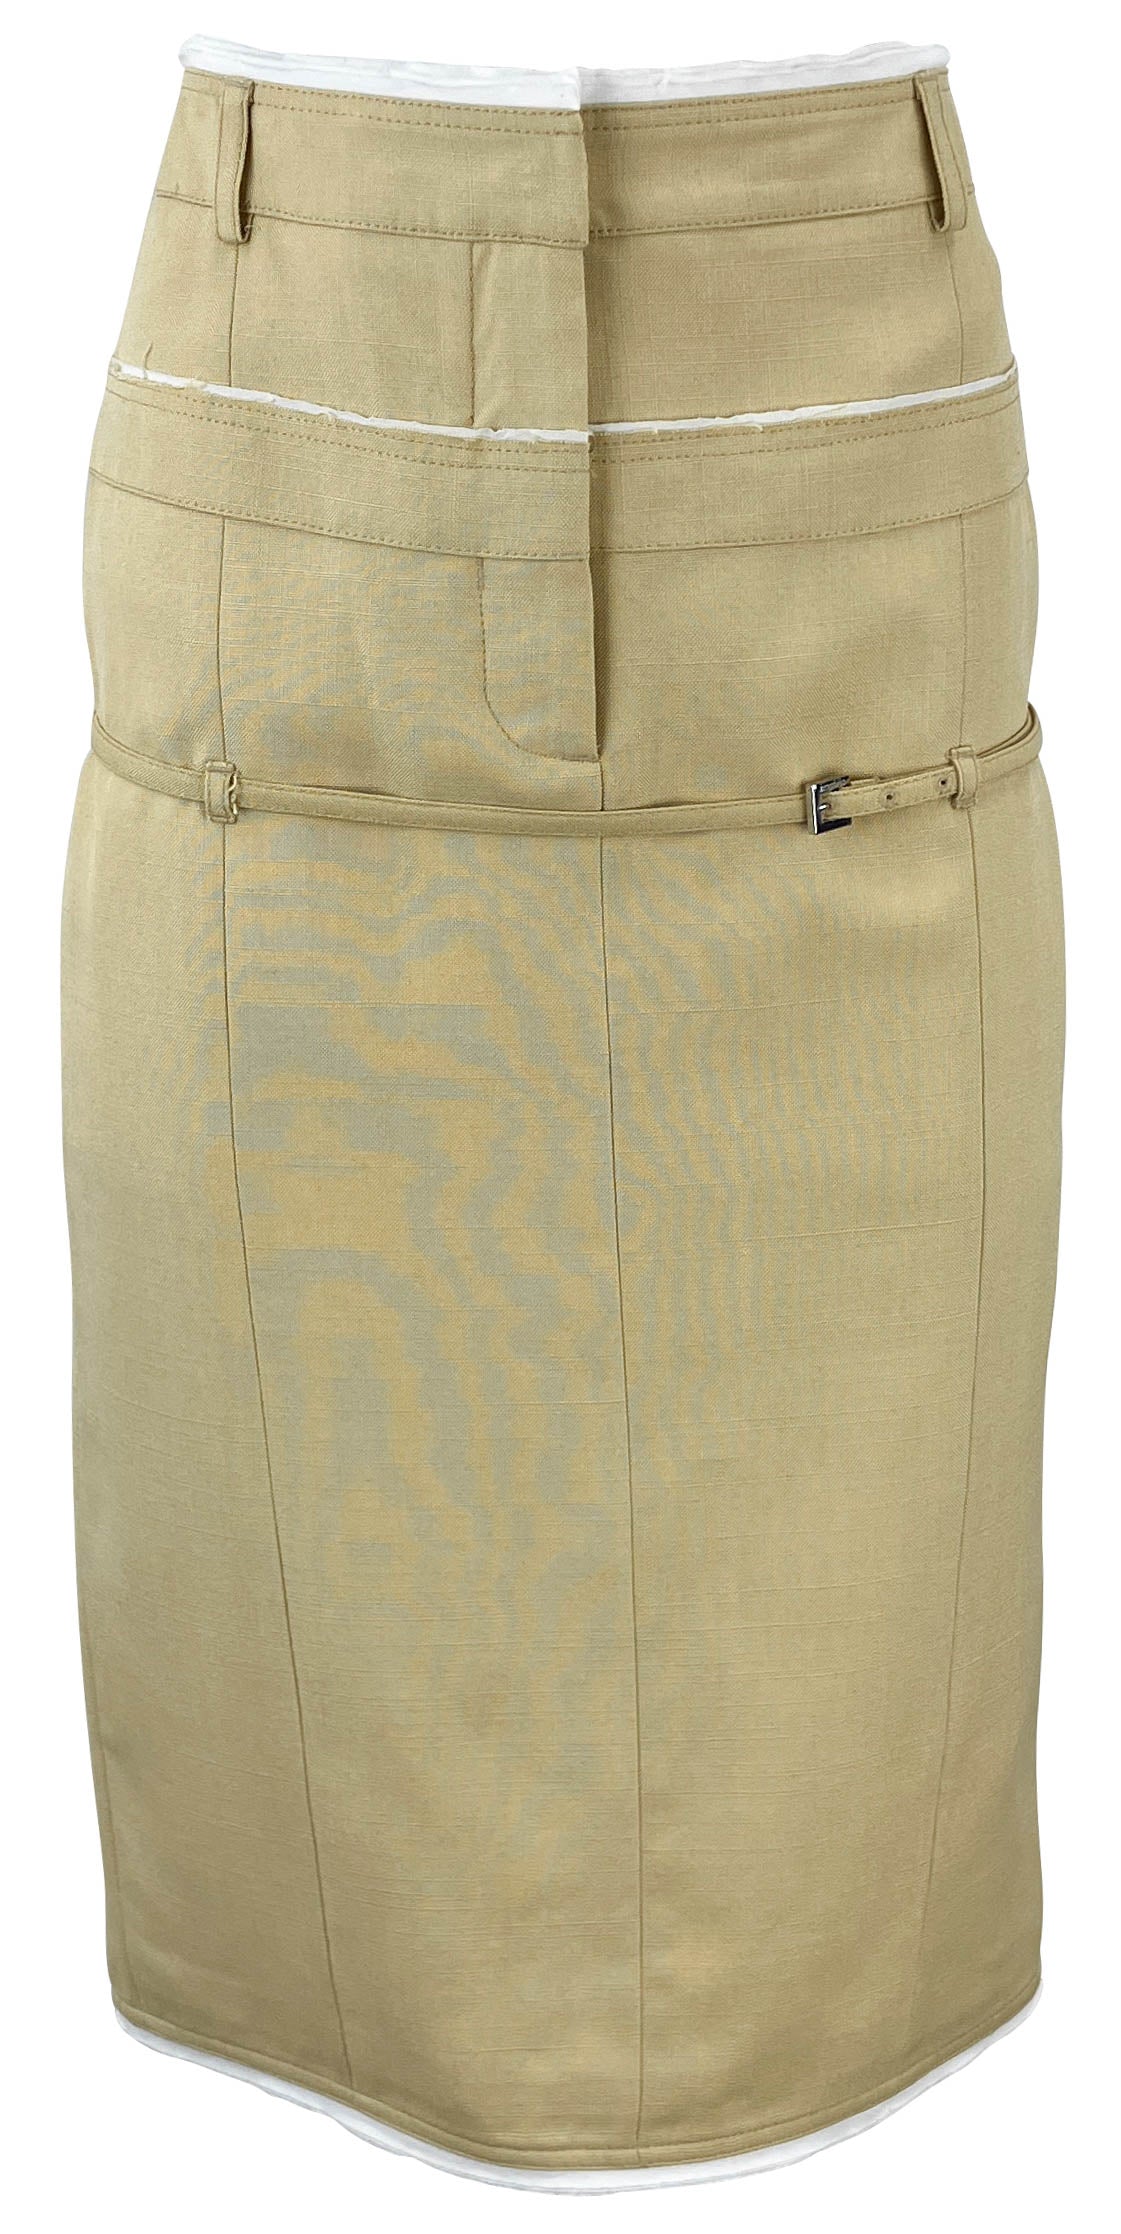 Jacquemus La Jupe Caraco Pencil Skirt in Neutrals - Discounts on Jacquemus at UAL